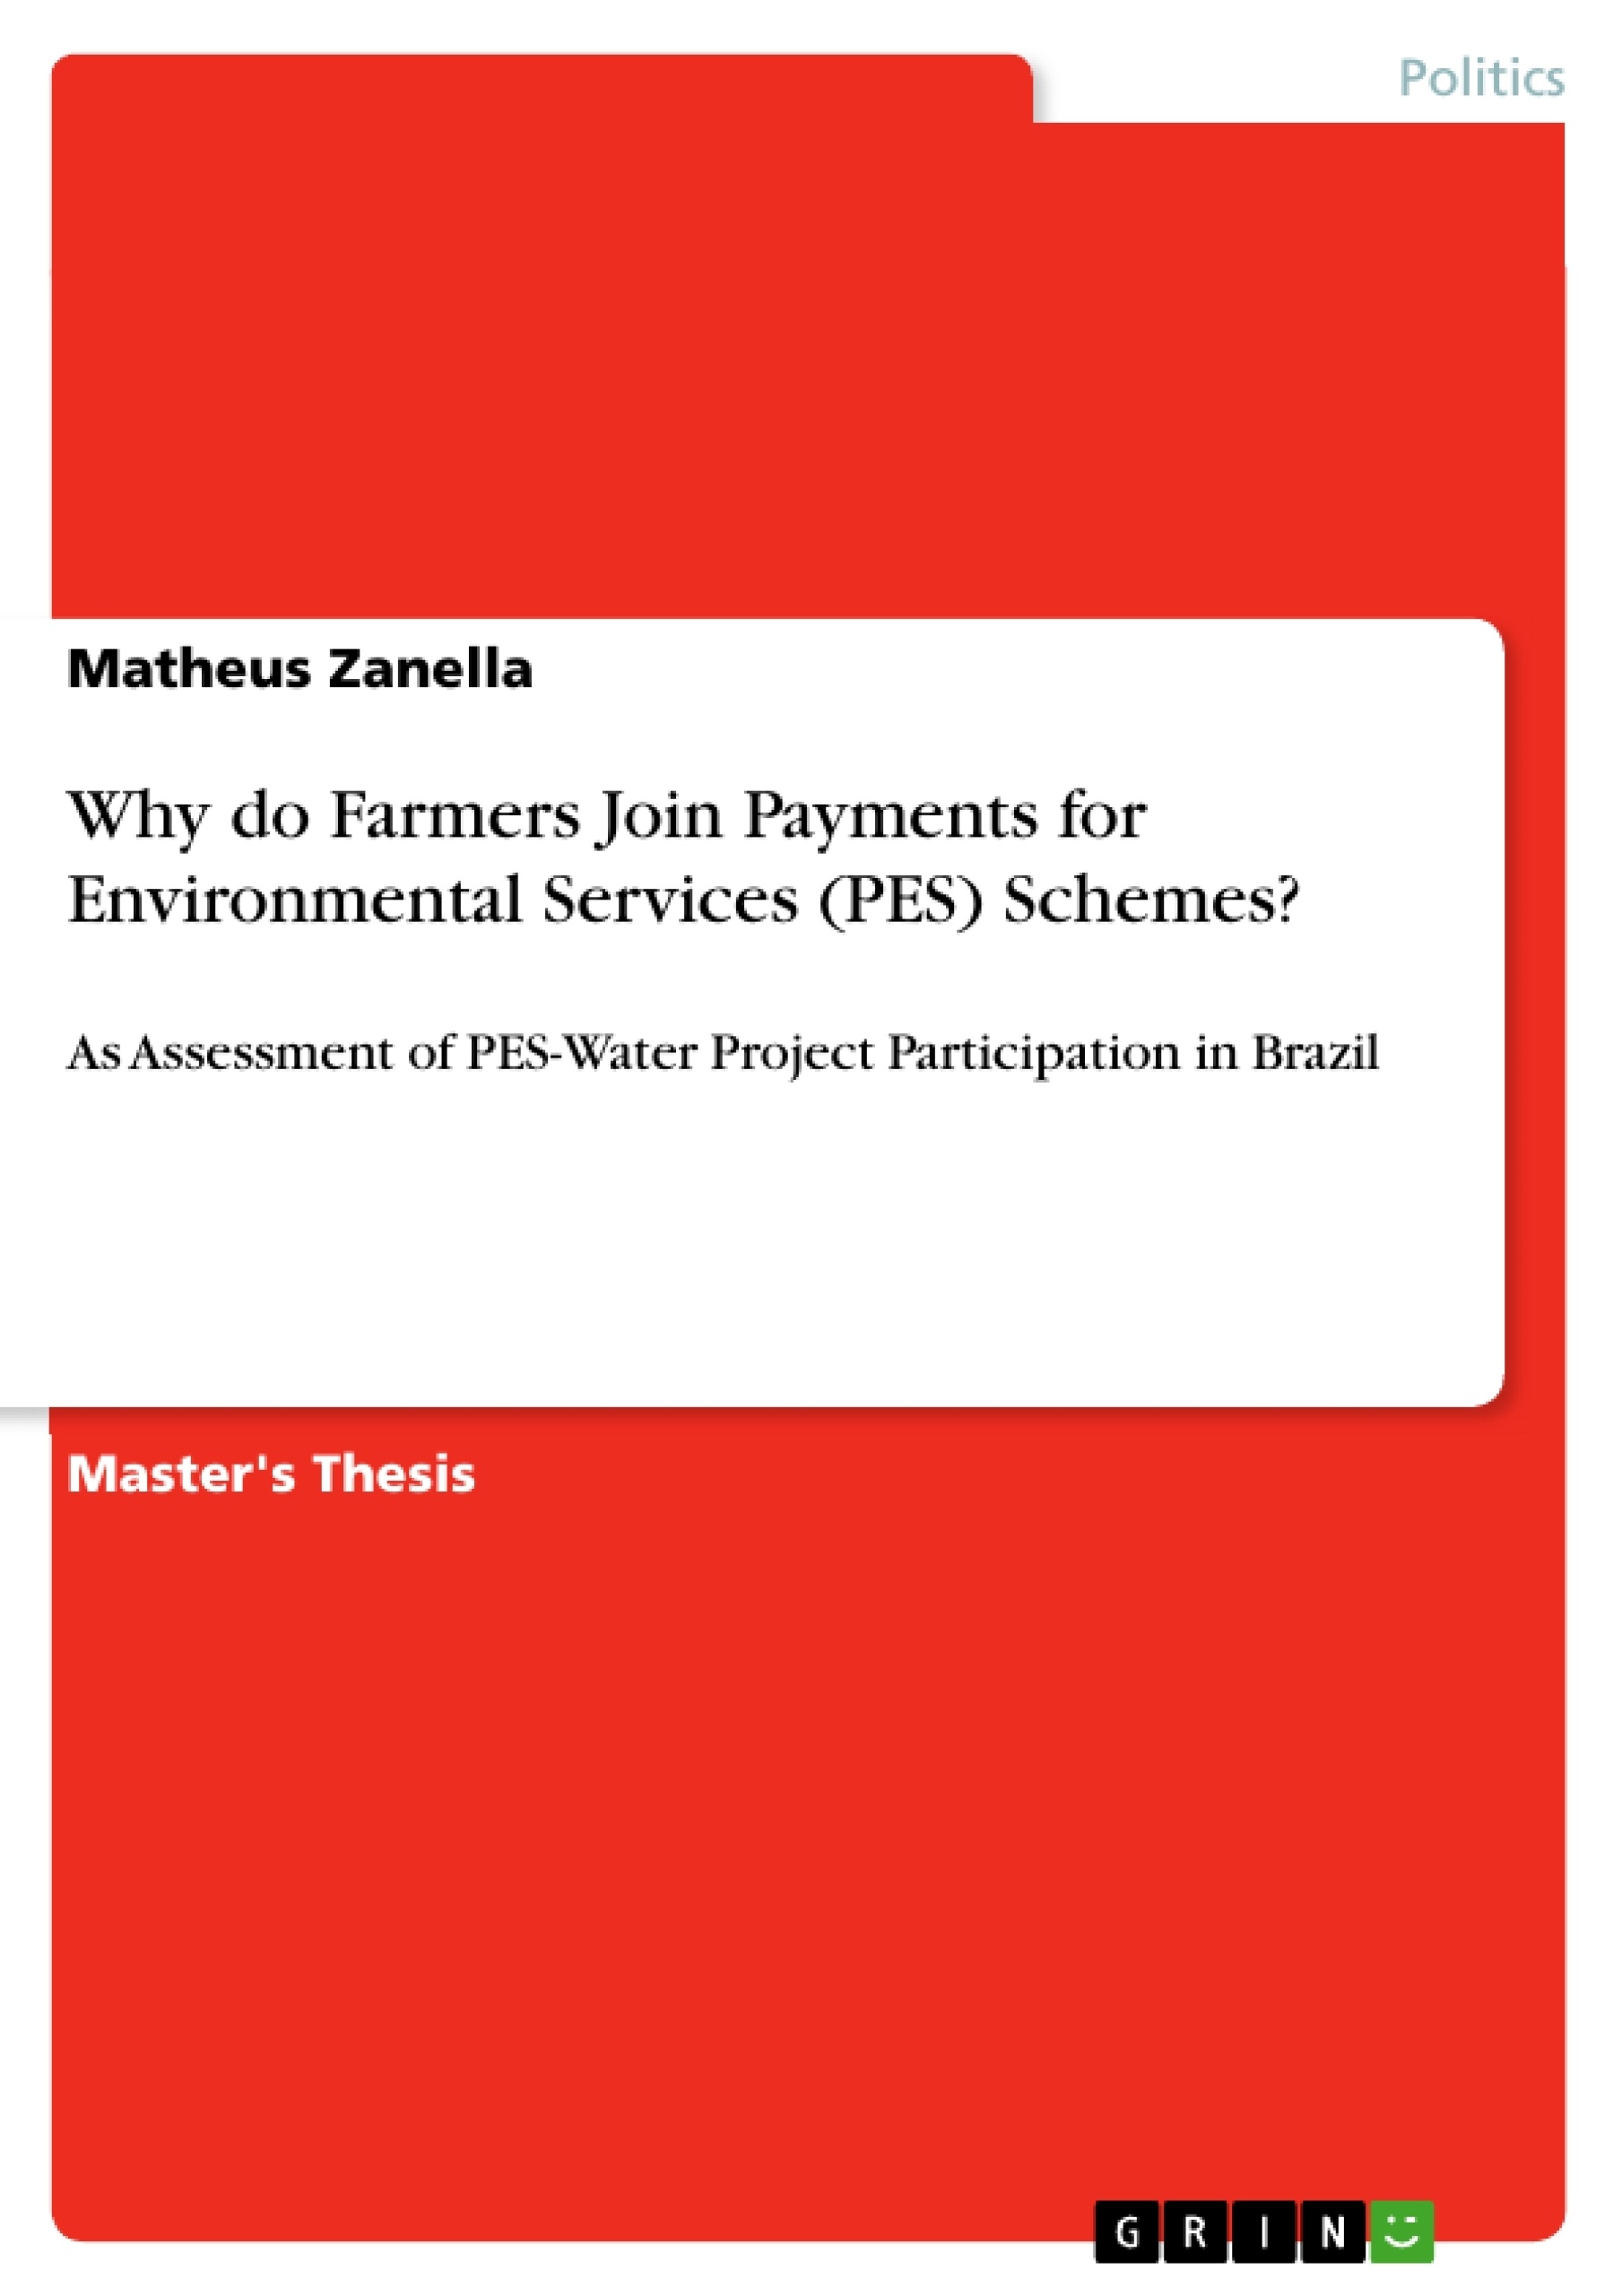 Title: Why do Farmers Join Payments for Environmental Services (PES) Schemes?